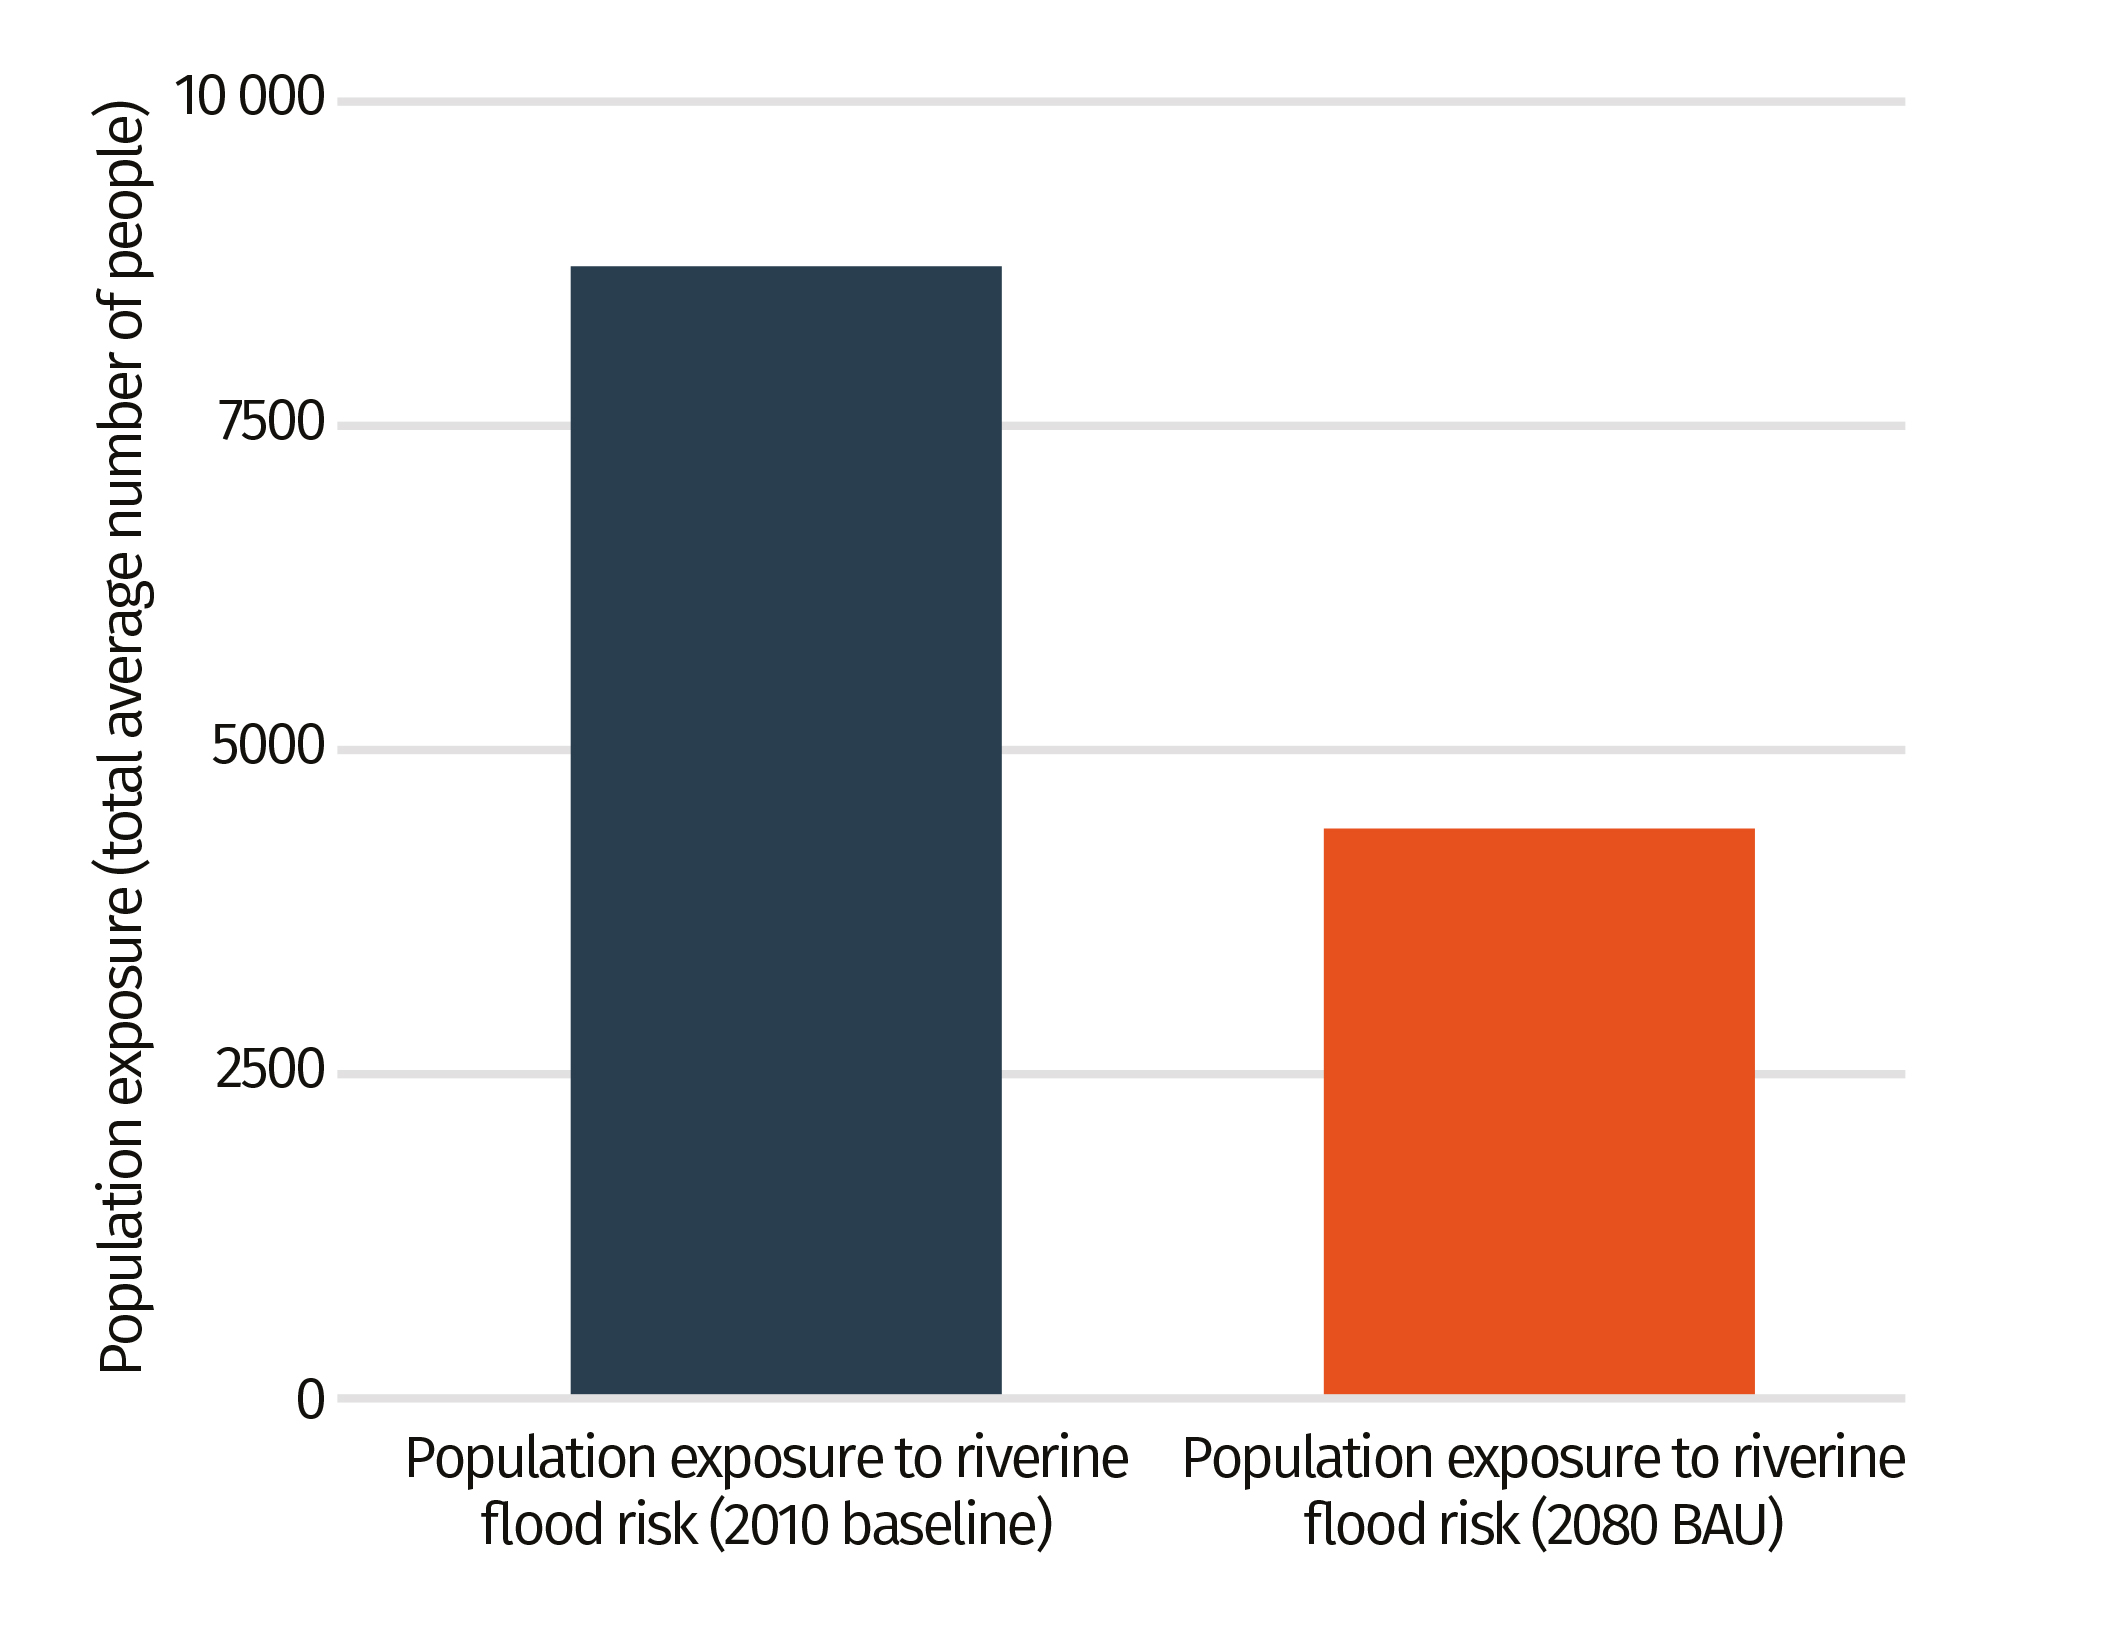 Change in population exposure to riverine flooding in Palestine